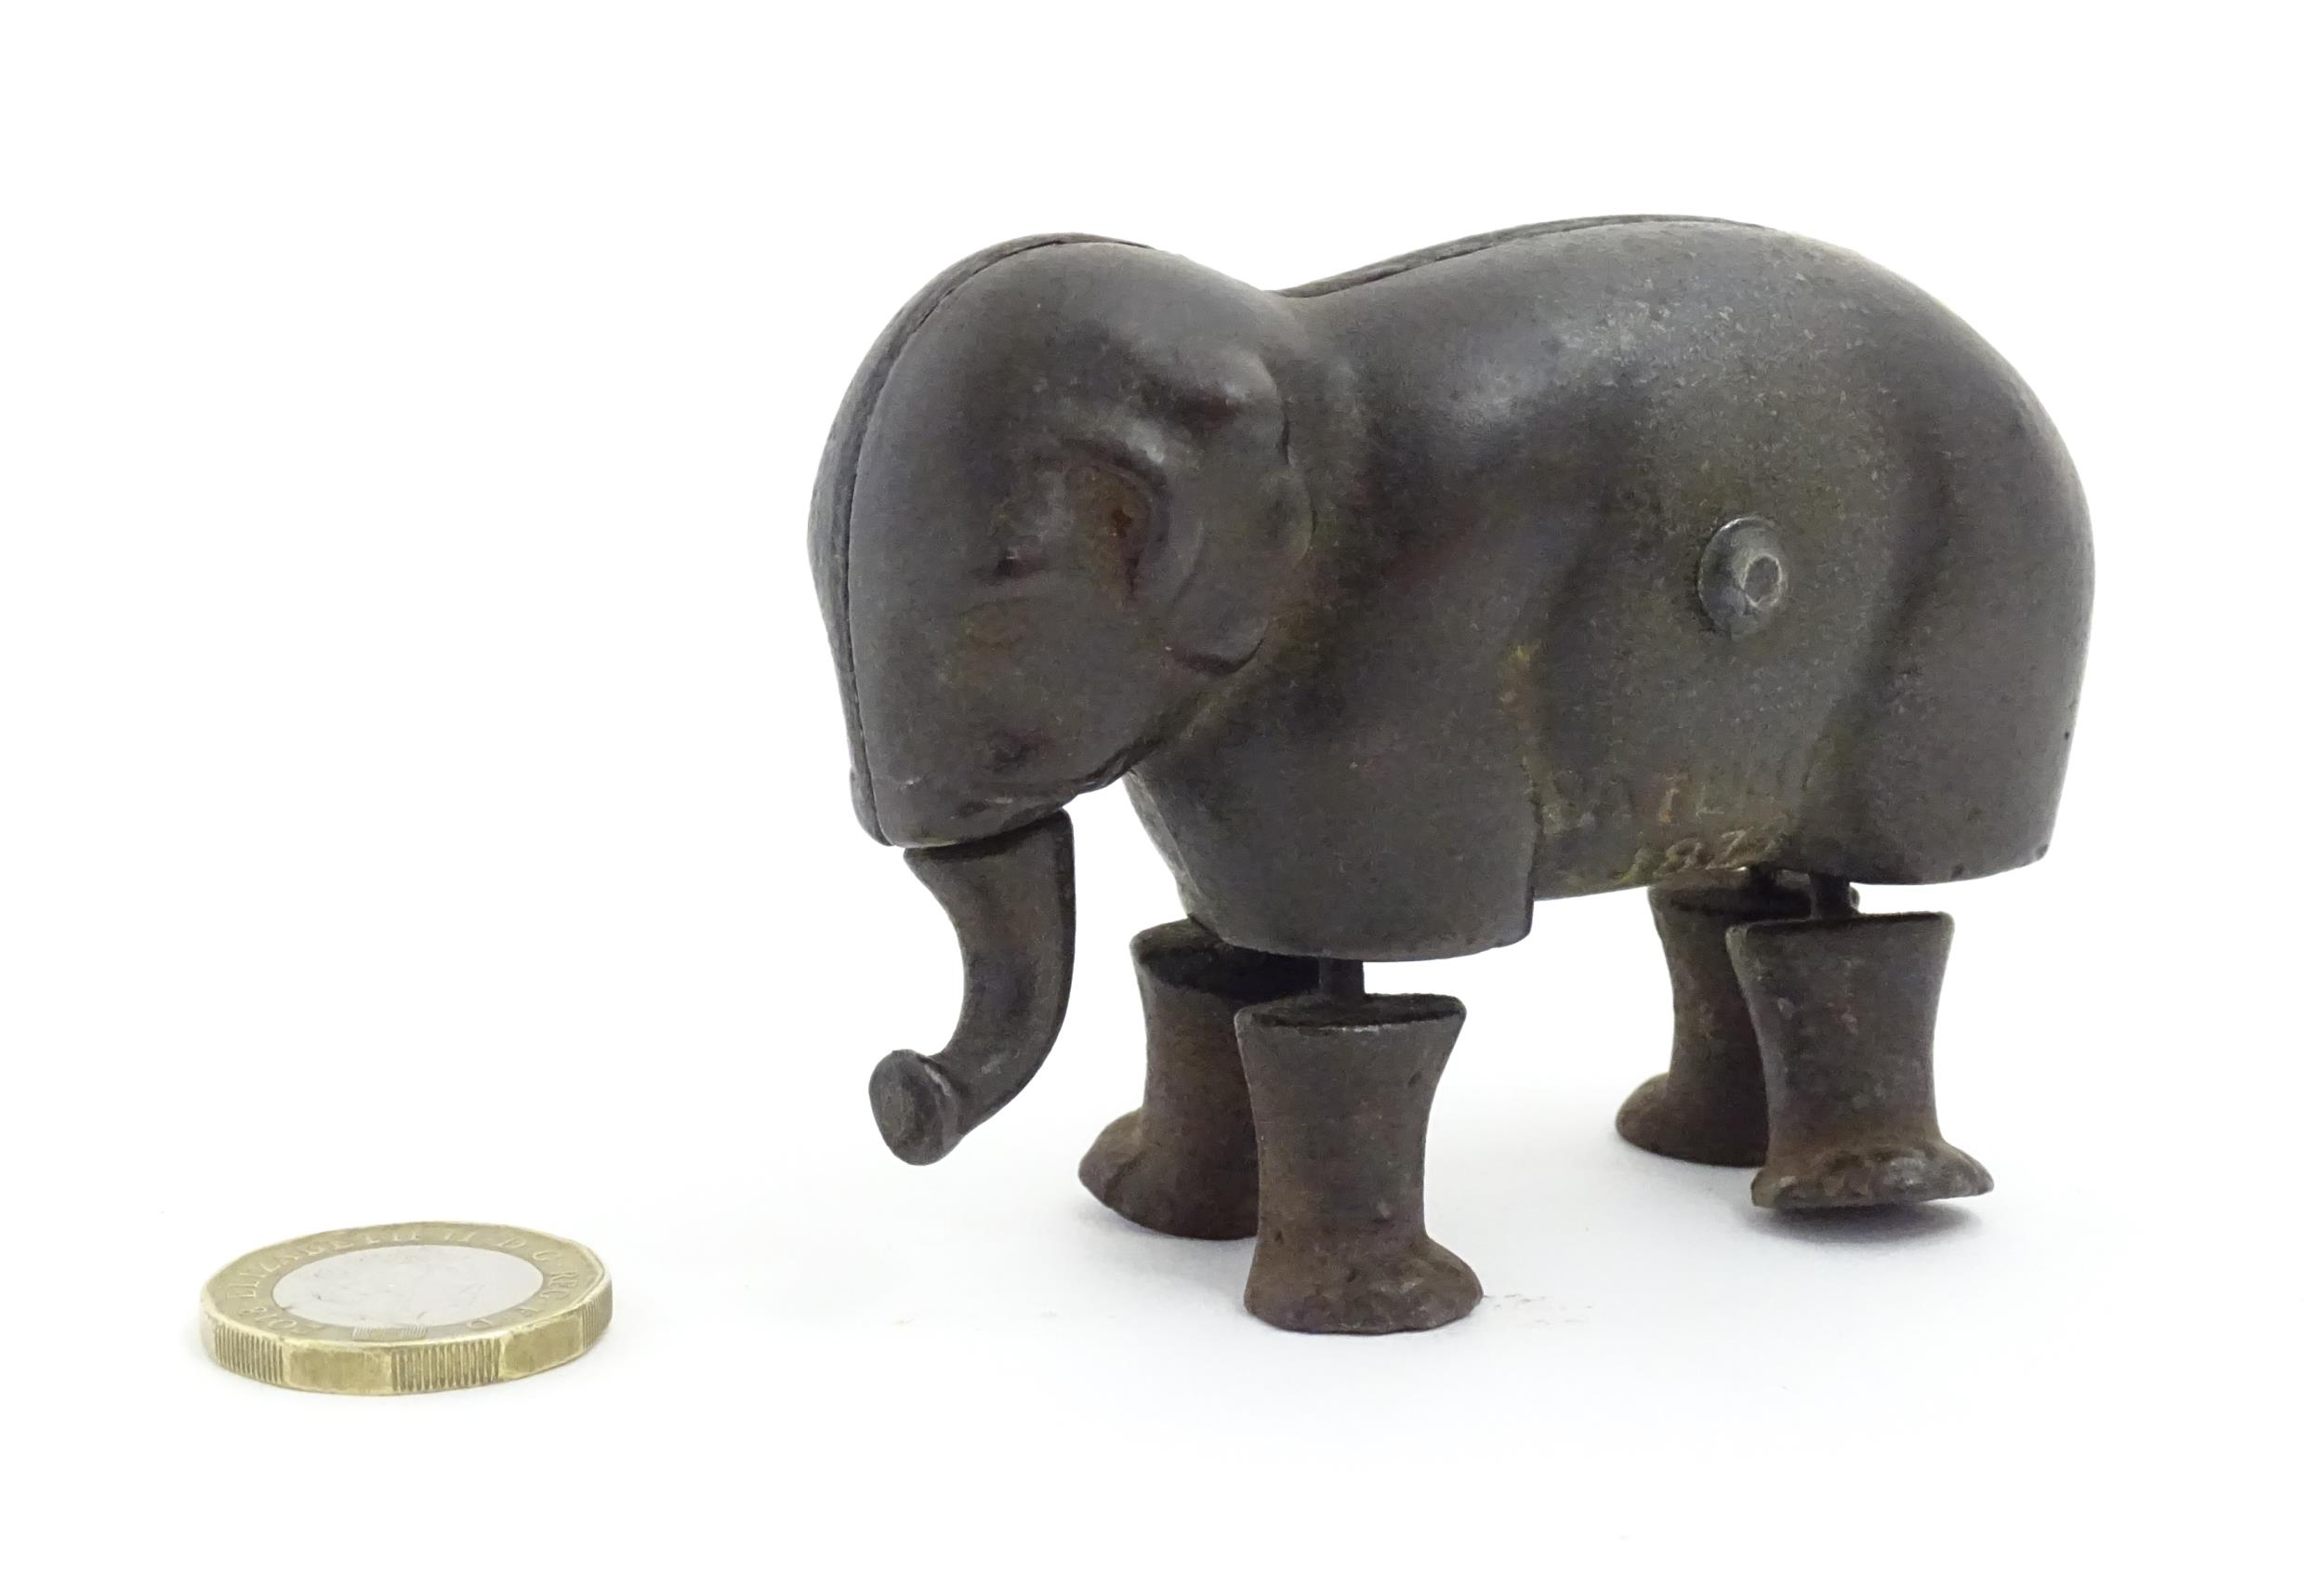 Toy: A late 19thC cast iron walking elephant toy with articulated legs and trunk, by the Ives Toy - Bild 3 aus 7